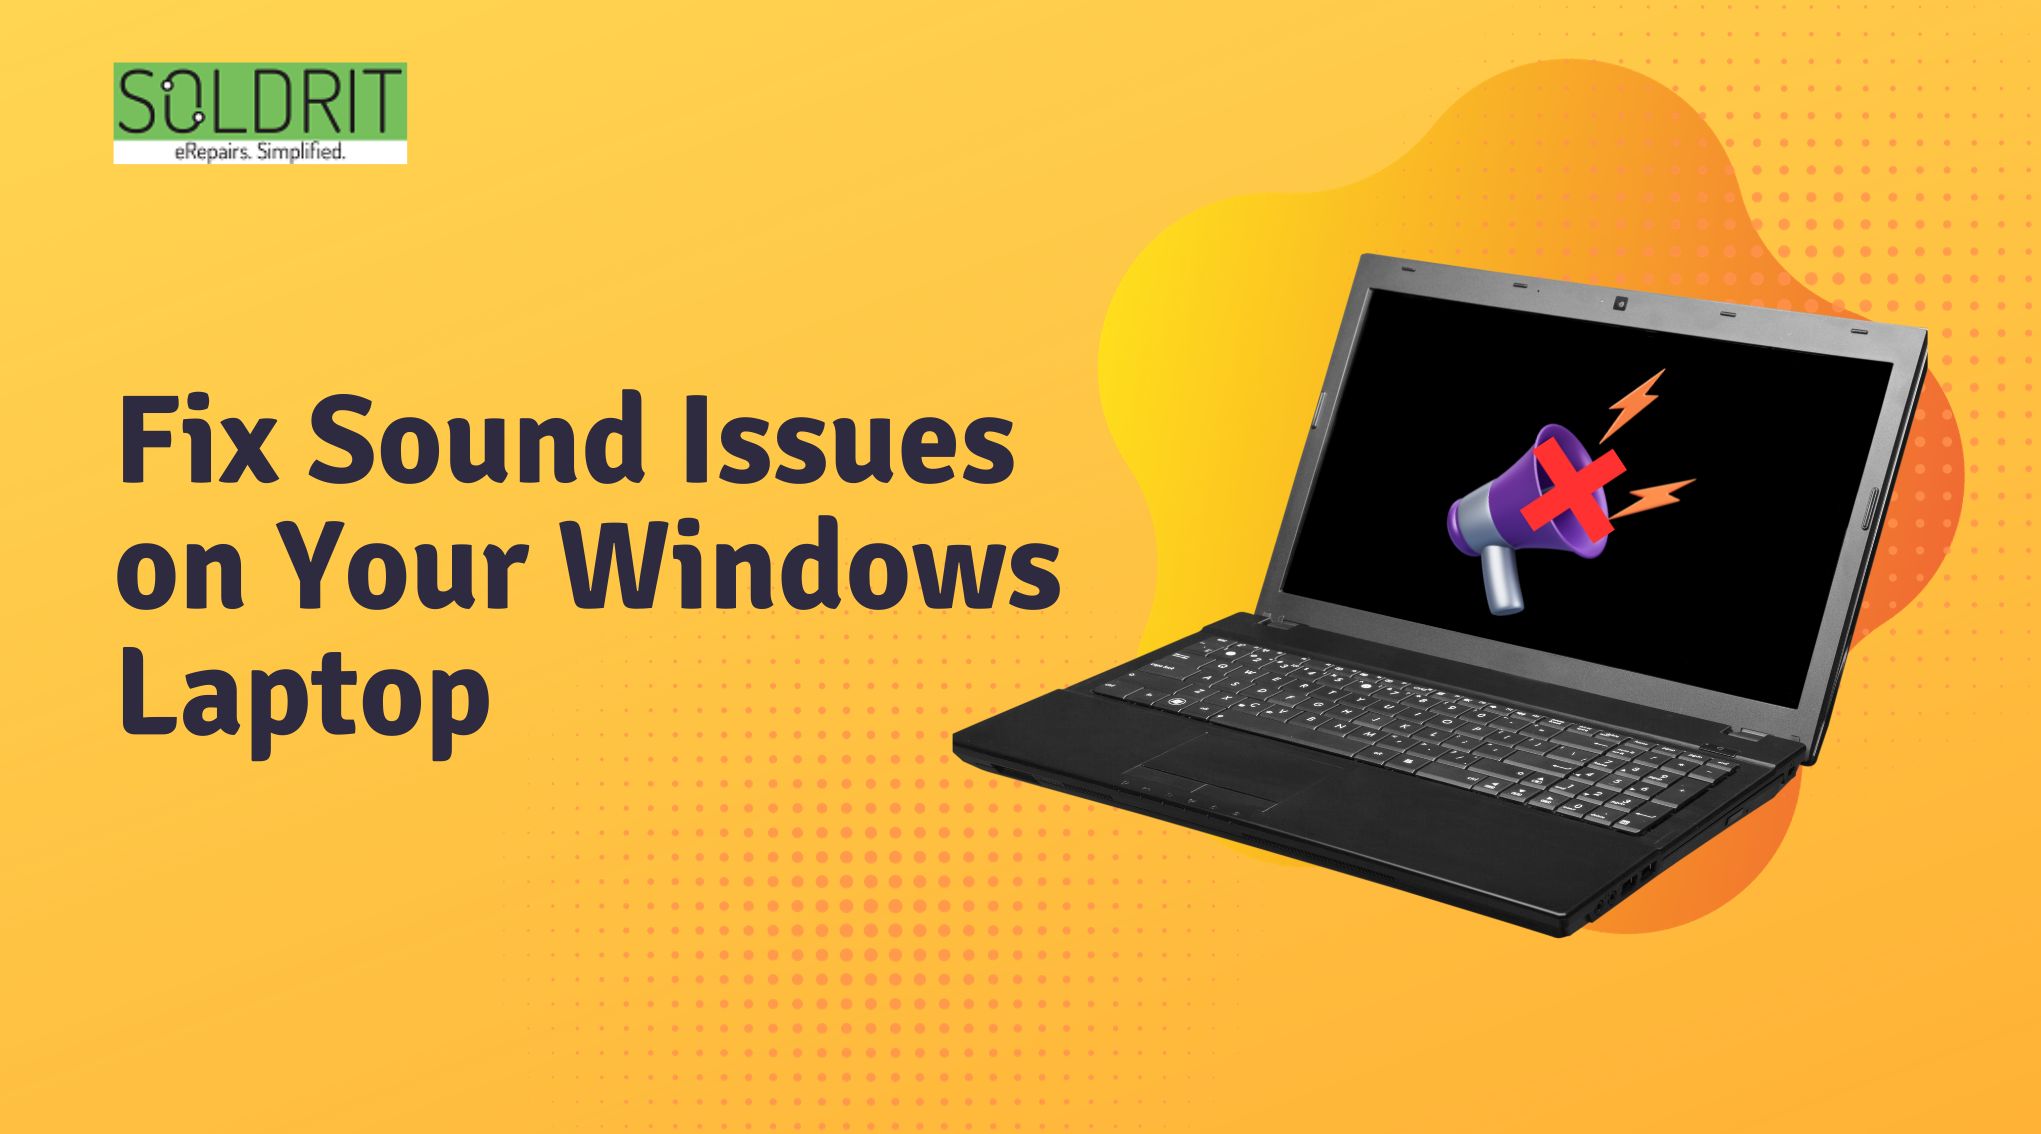 How to Fix Sound Issues on Your Windows Laptop